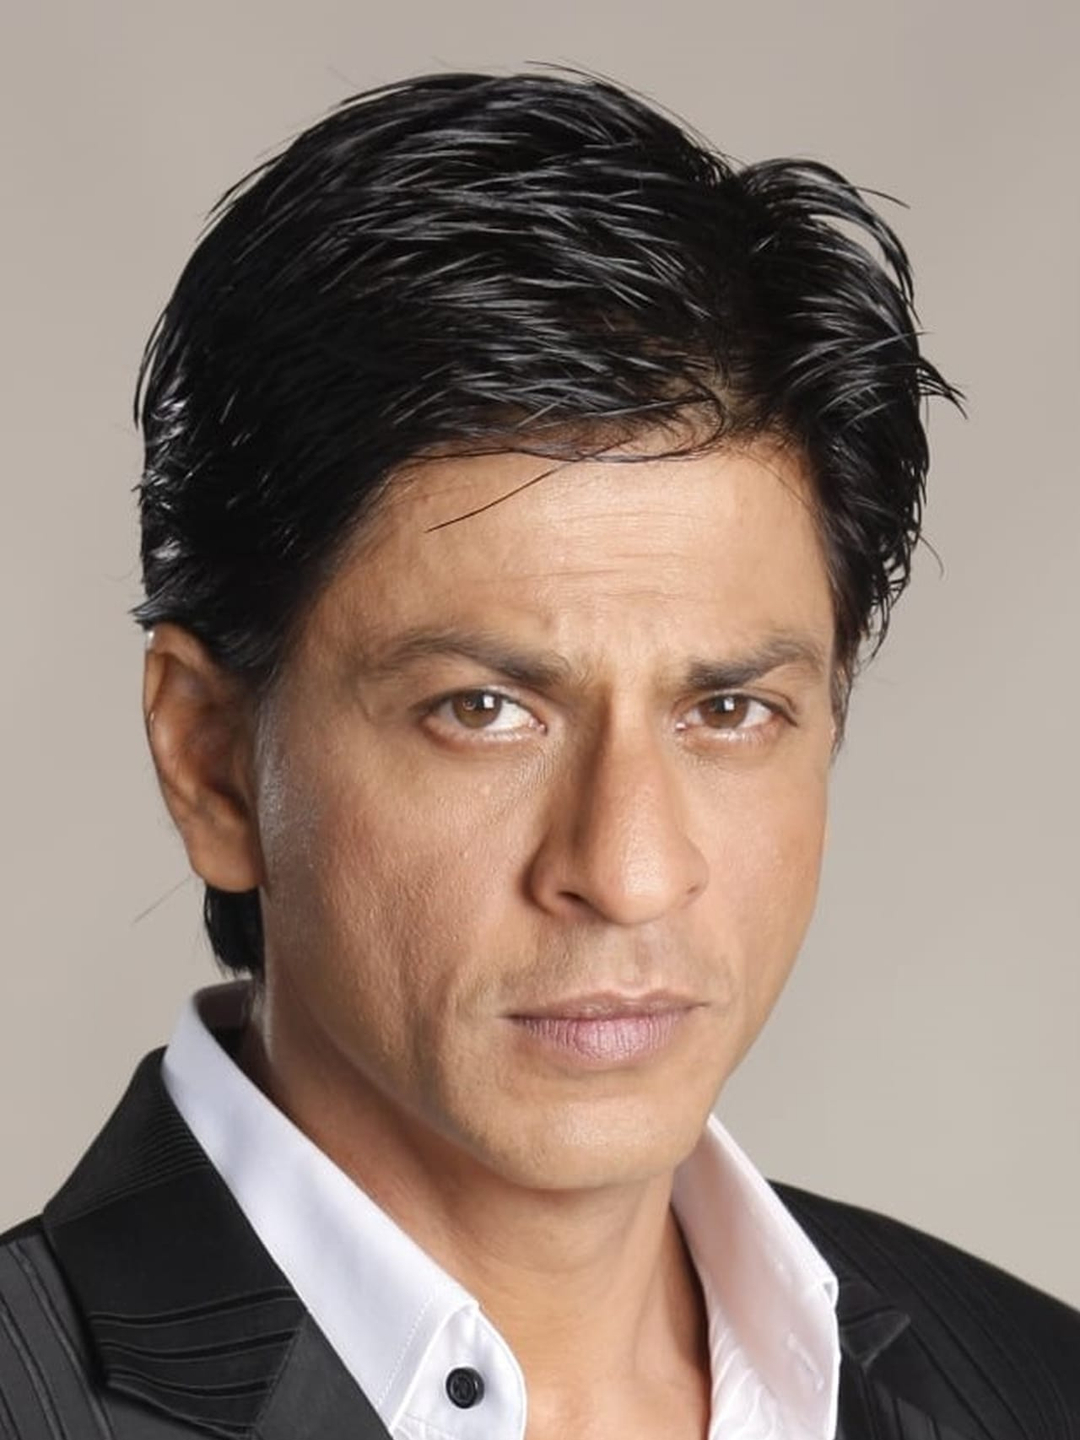 Shah Rukh Khan how did he became famous